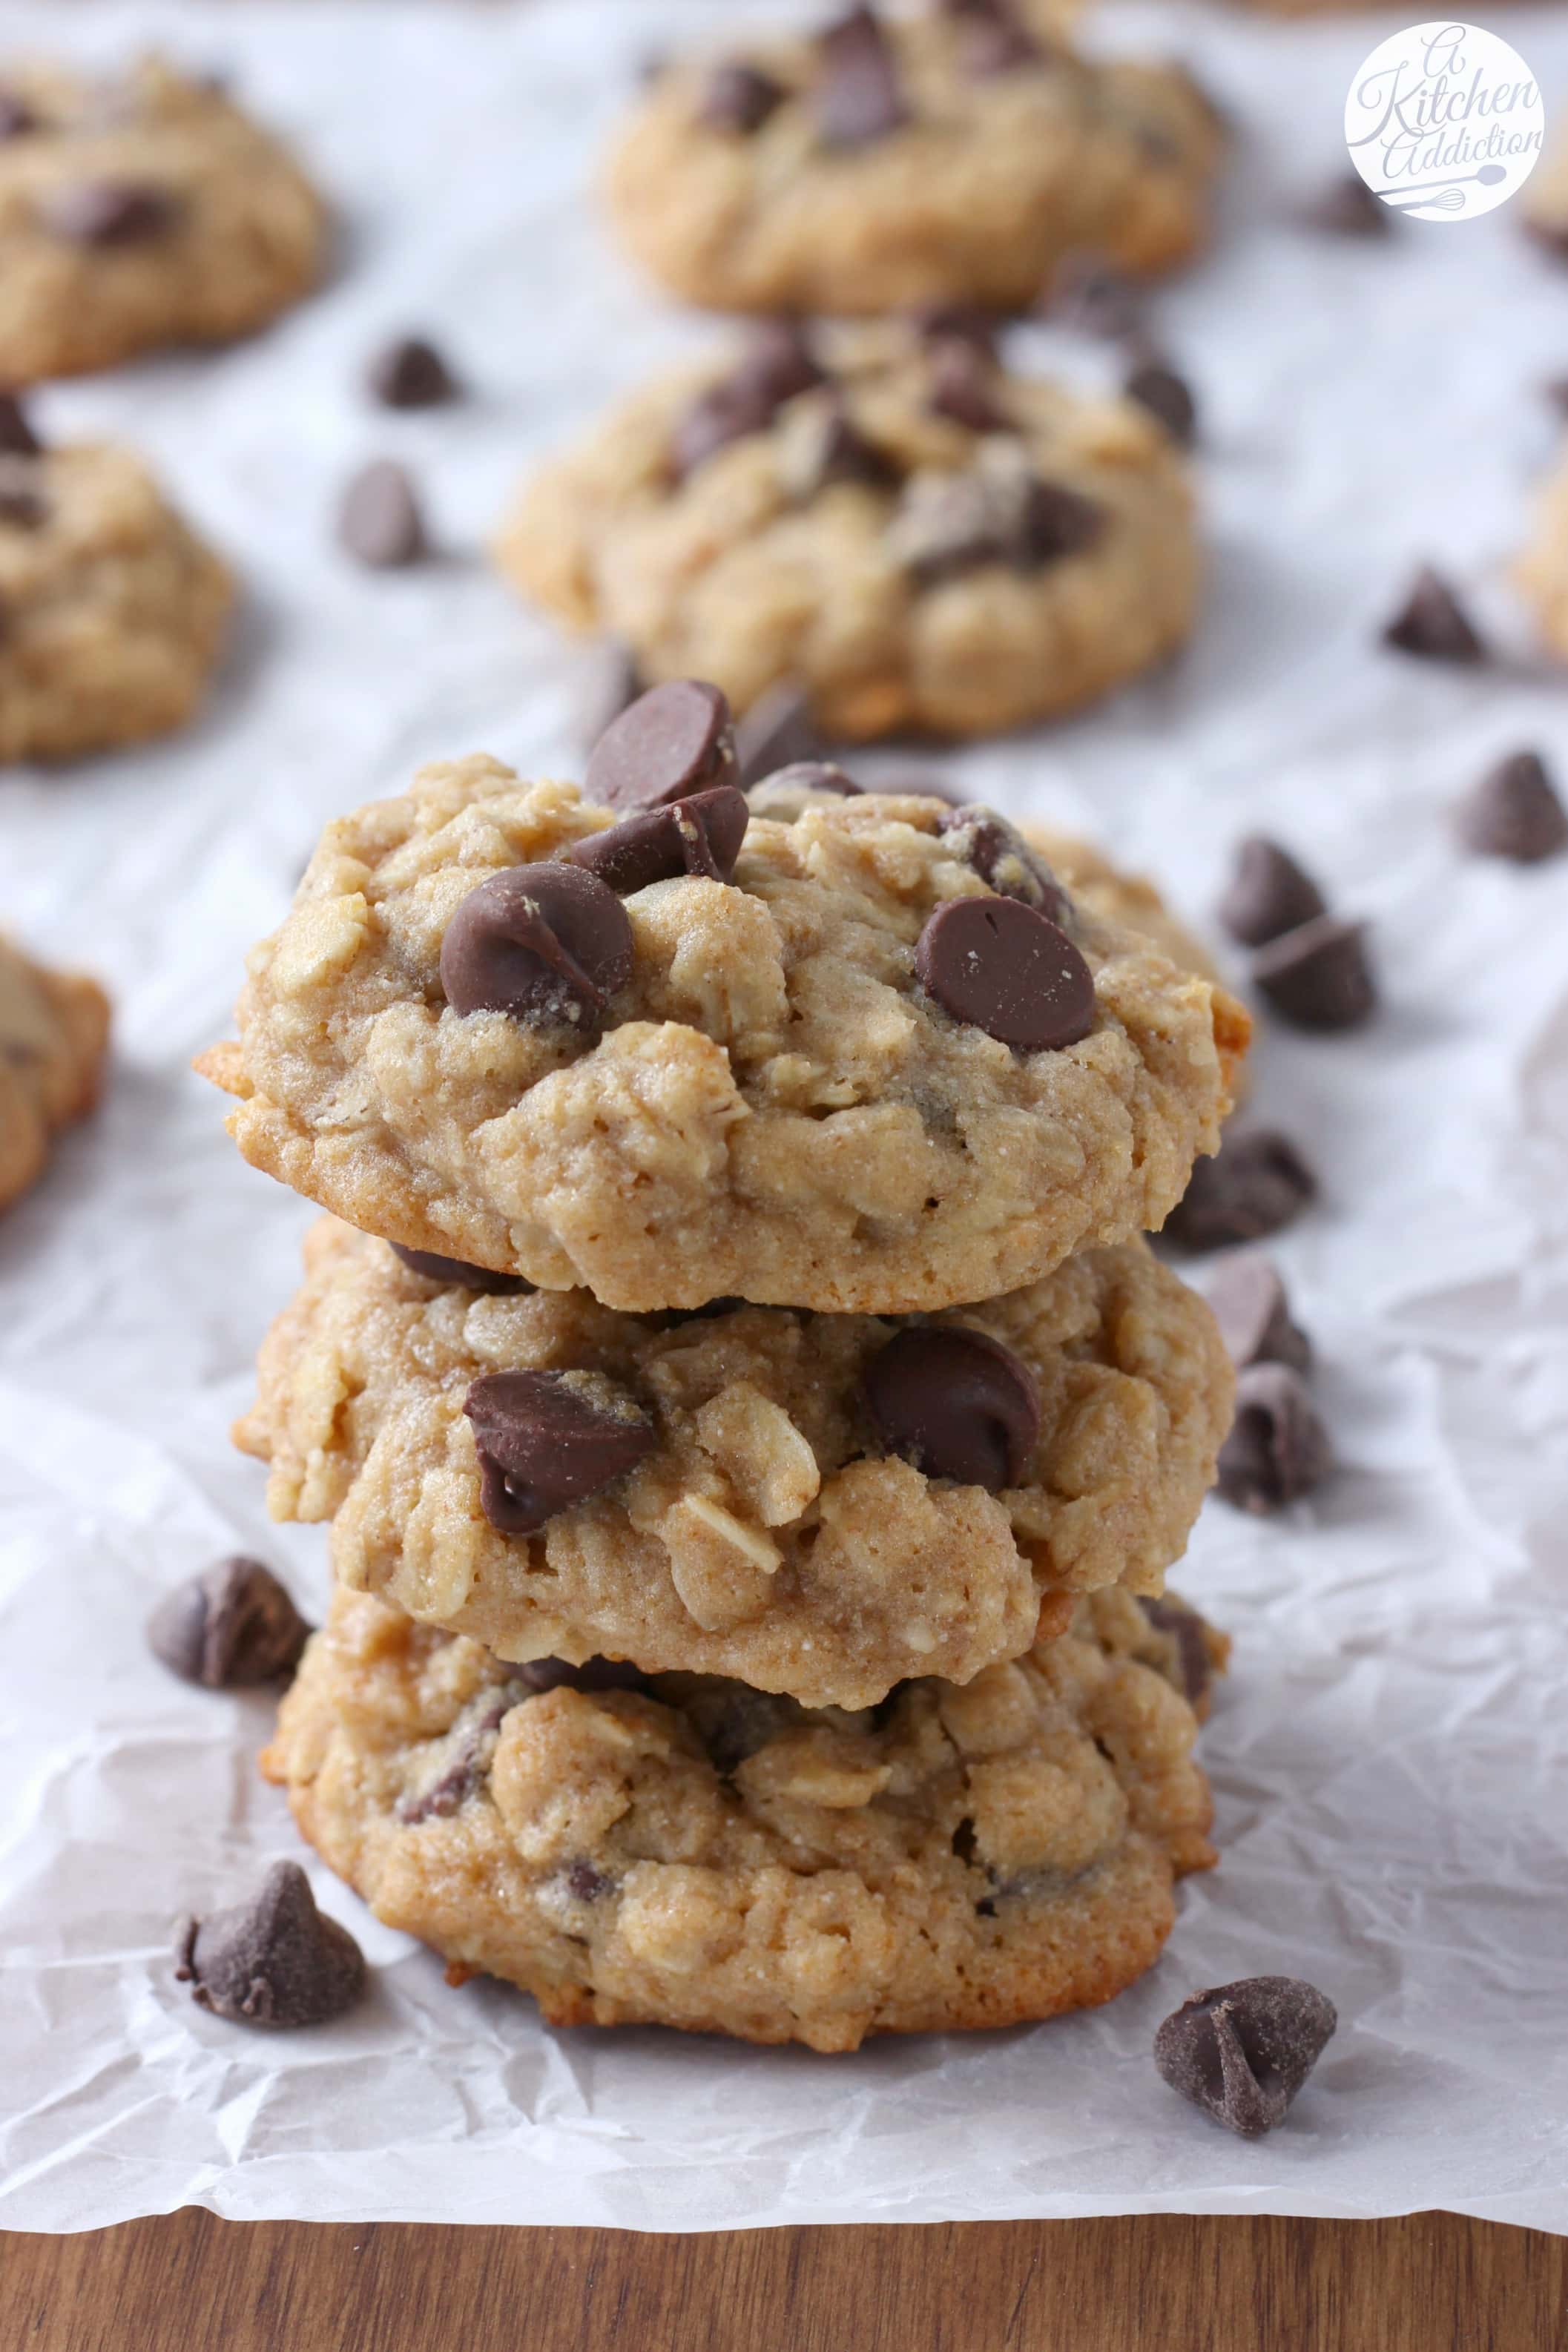 Honey Chocolate Chip Oatmeal Cookies Recipe from A Kitchen Addiction